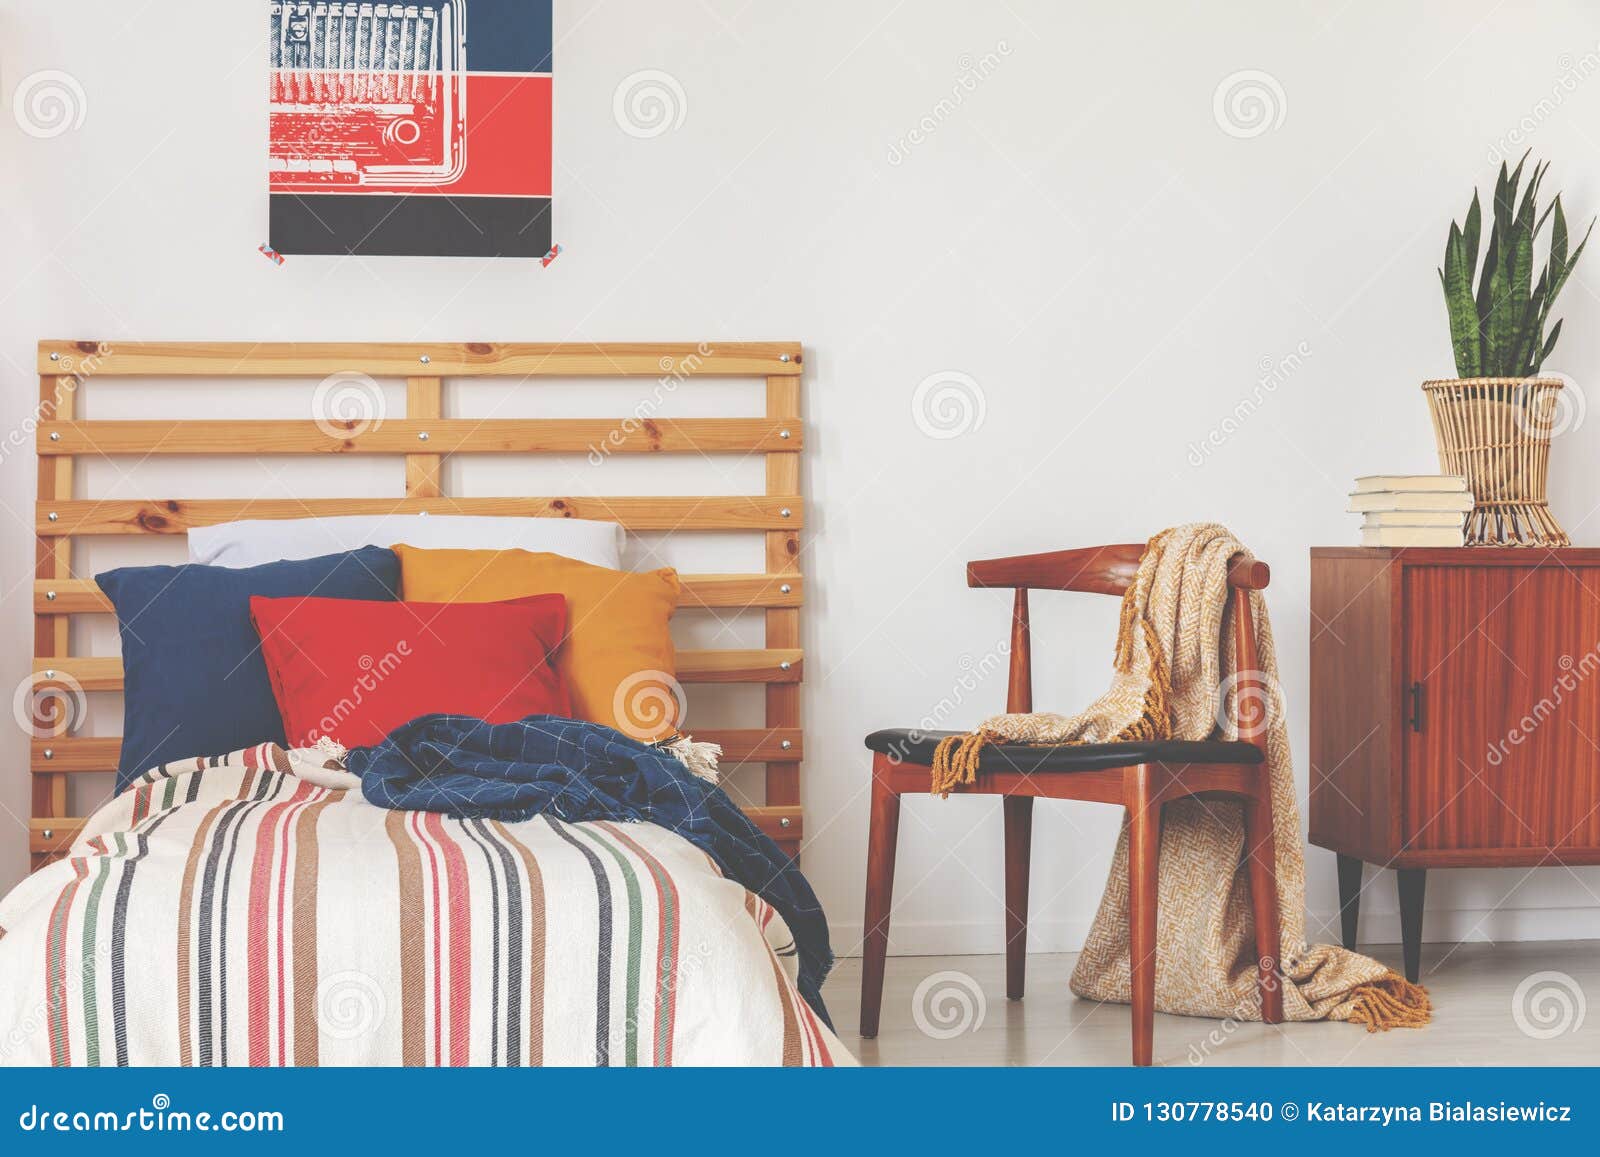 blue, red and orange pillows on single bed with stripped duvet and wooden headboard in oldschool bedroom interior, real photo